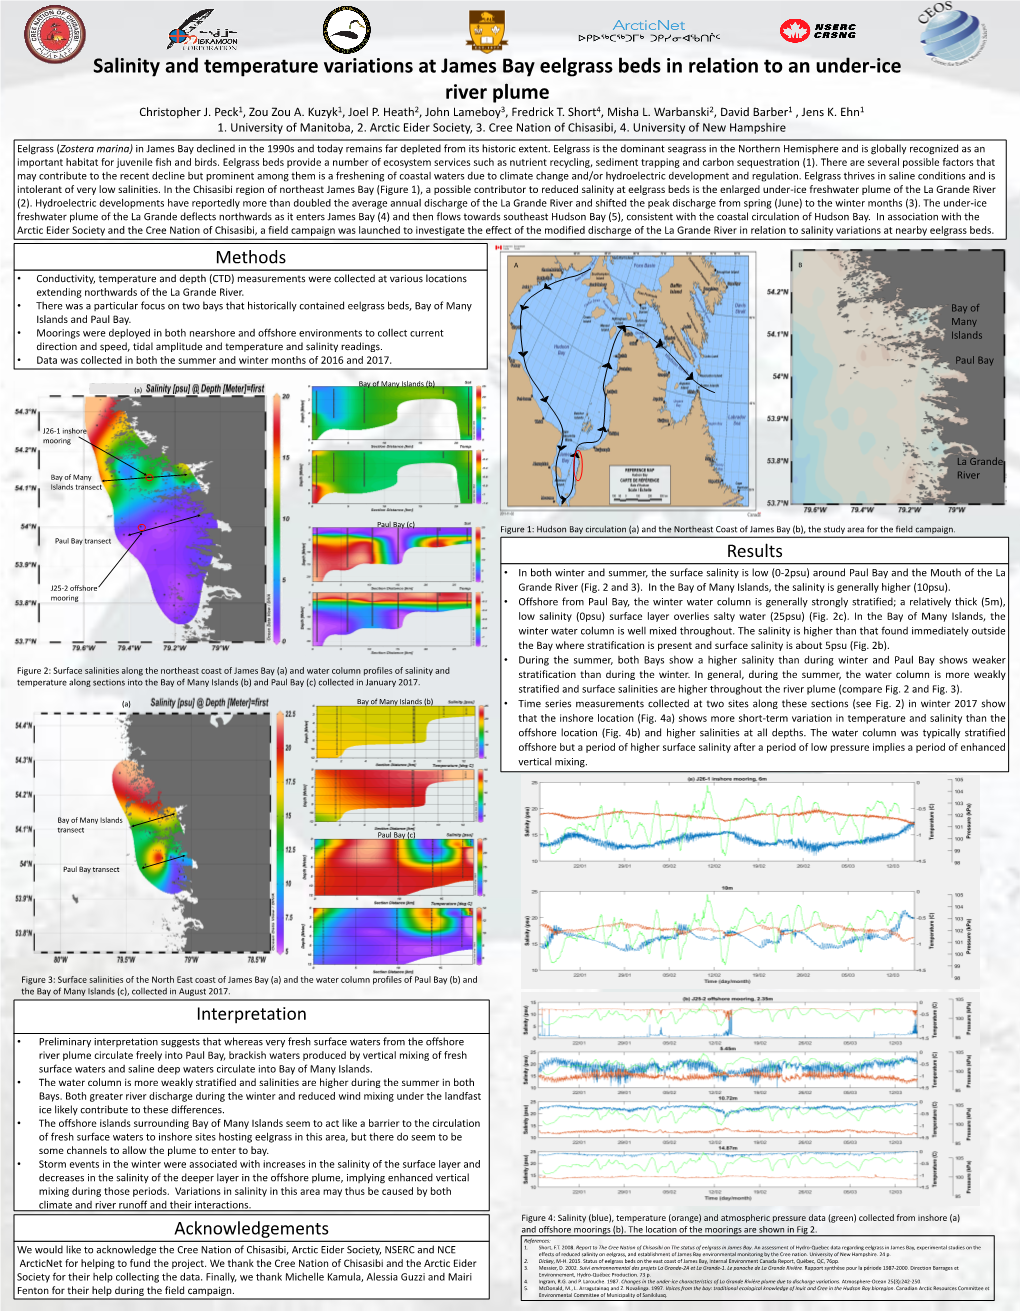 Salinity and Temperature Variations at James Bay Eelgrass Beds in Relation to an Under-Ice River Plume Christopher J